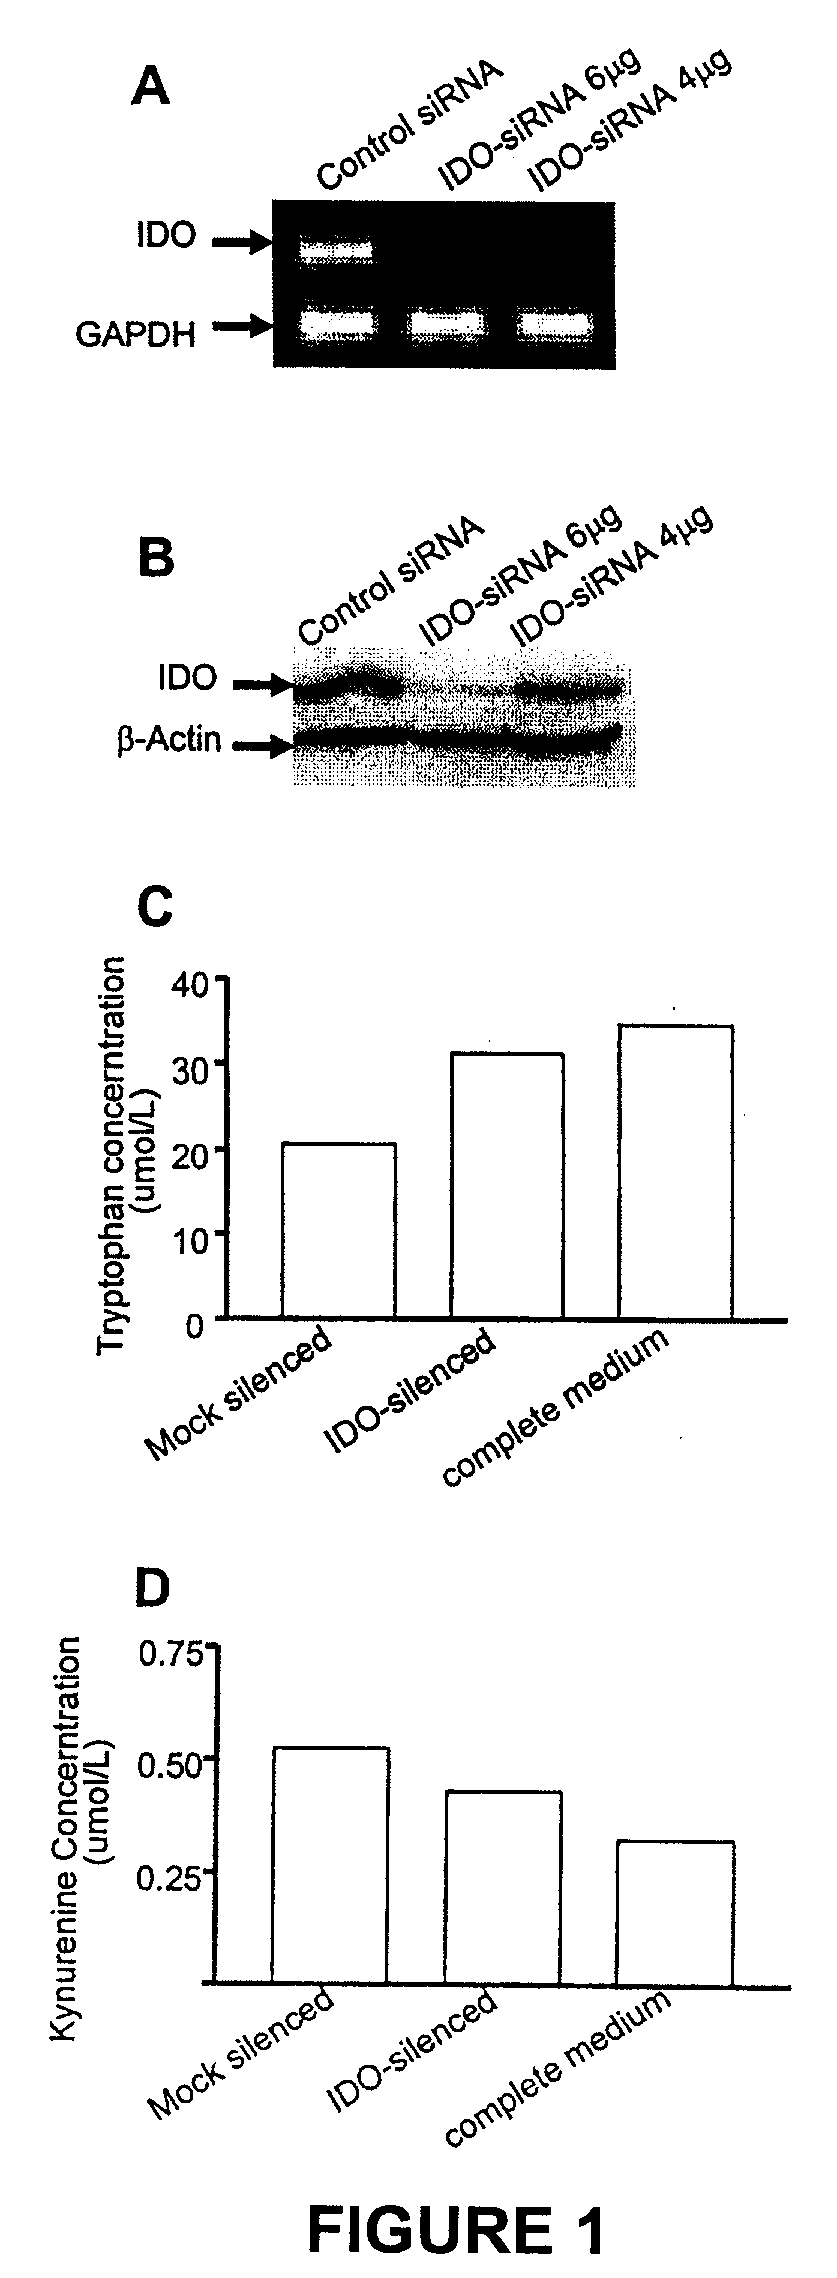 Method of cancer treatment using sirna silencing